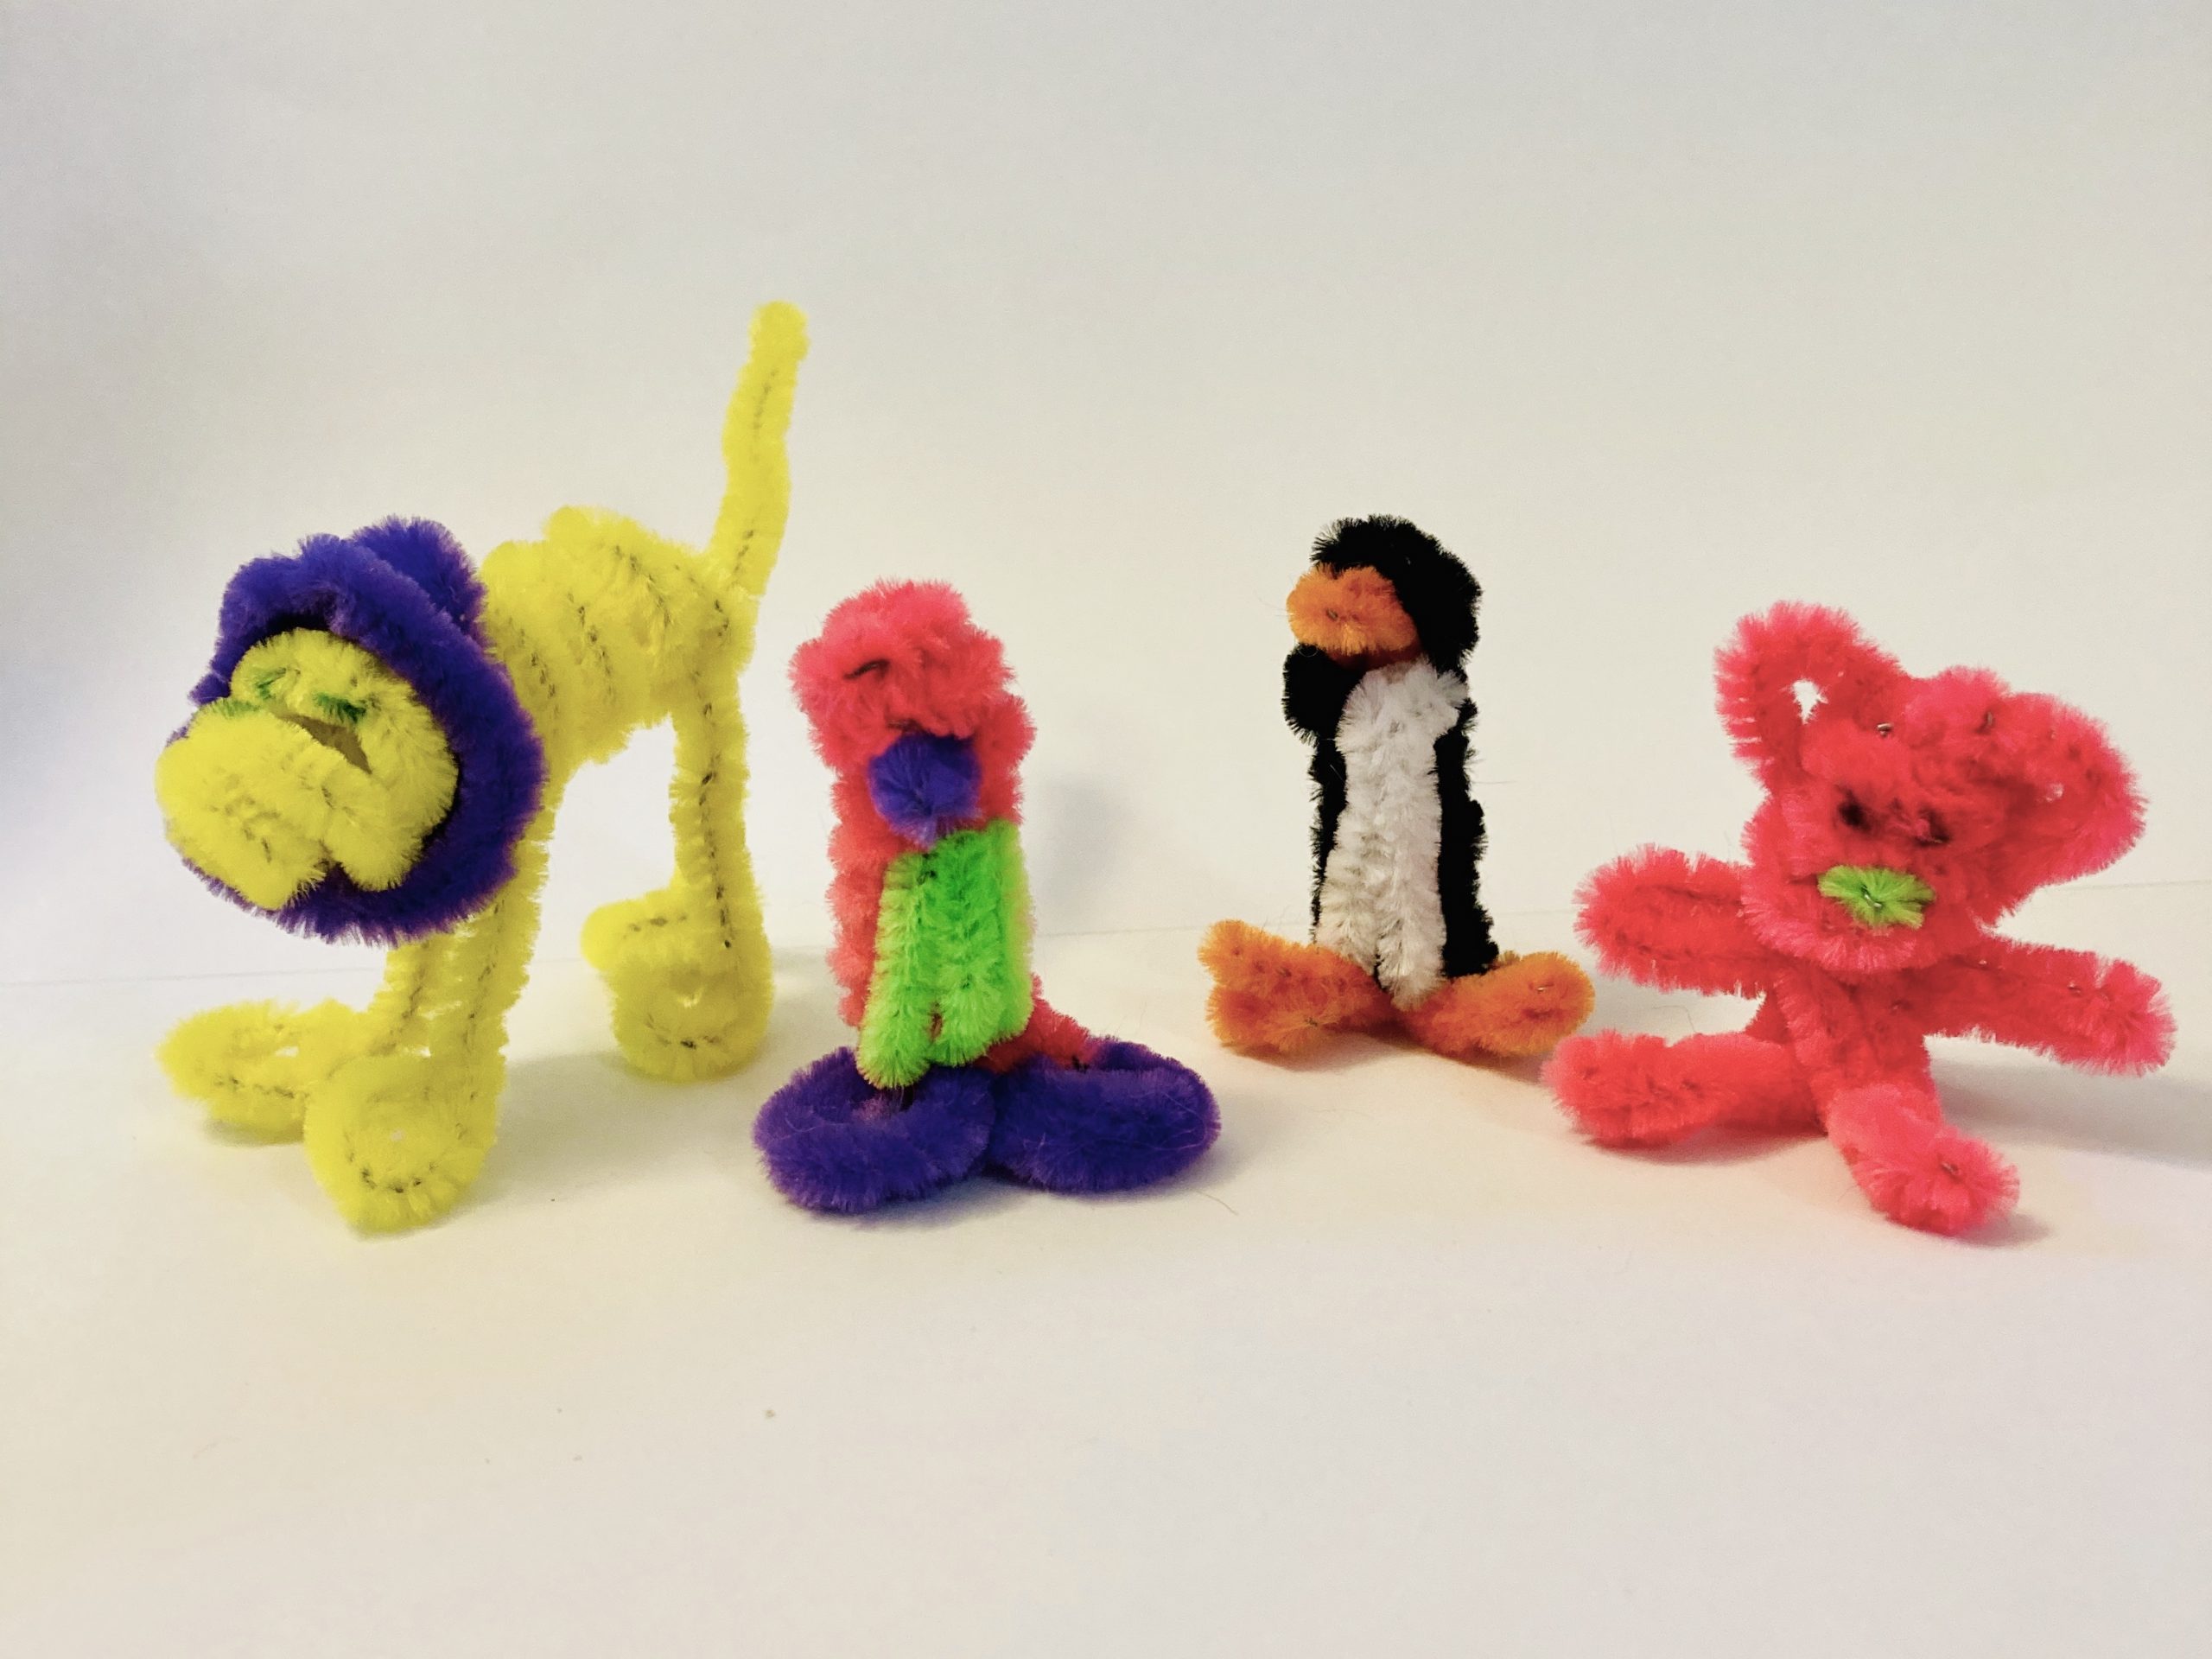 Pipe Cleaners Set Tutorial